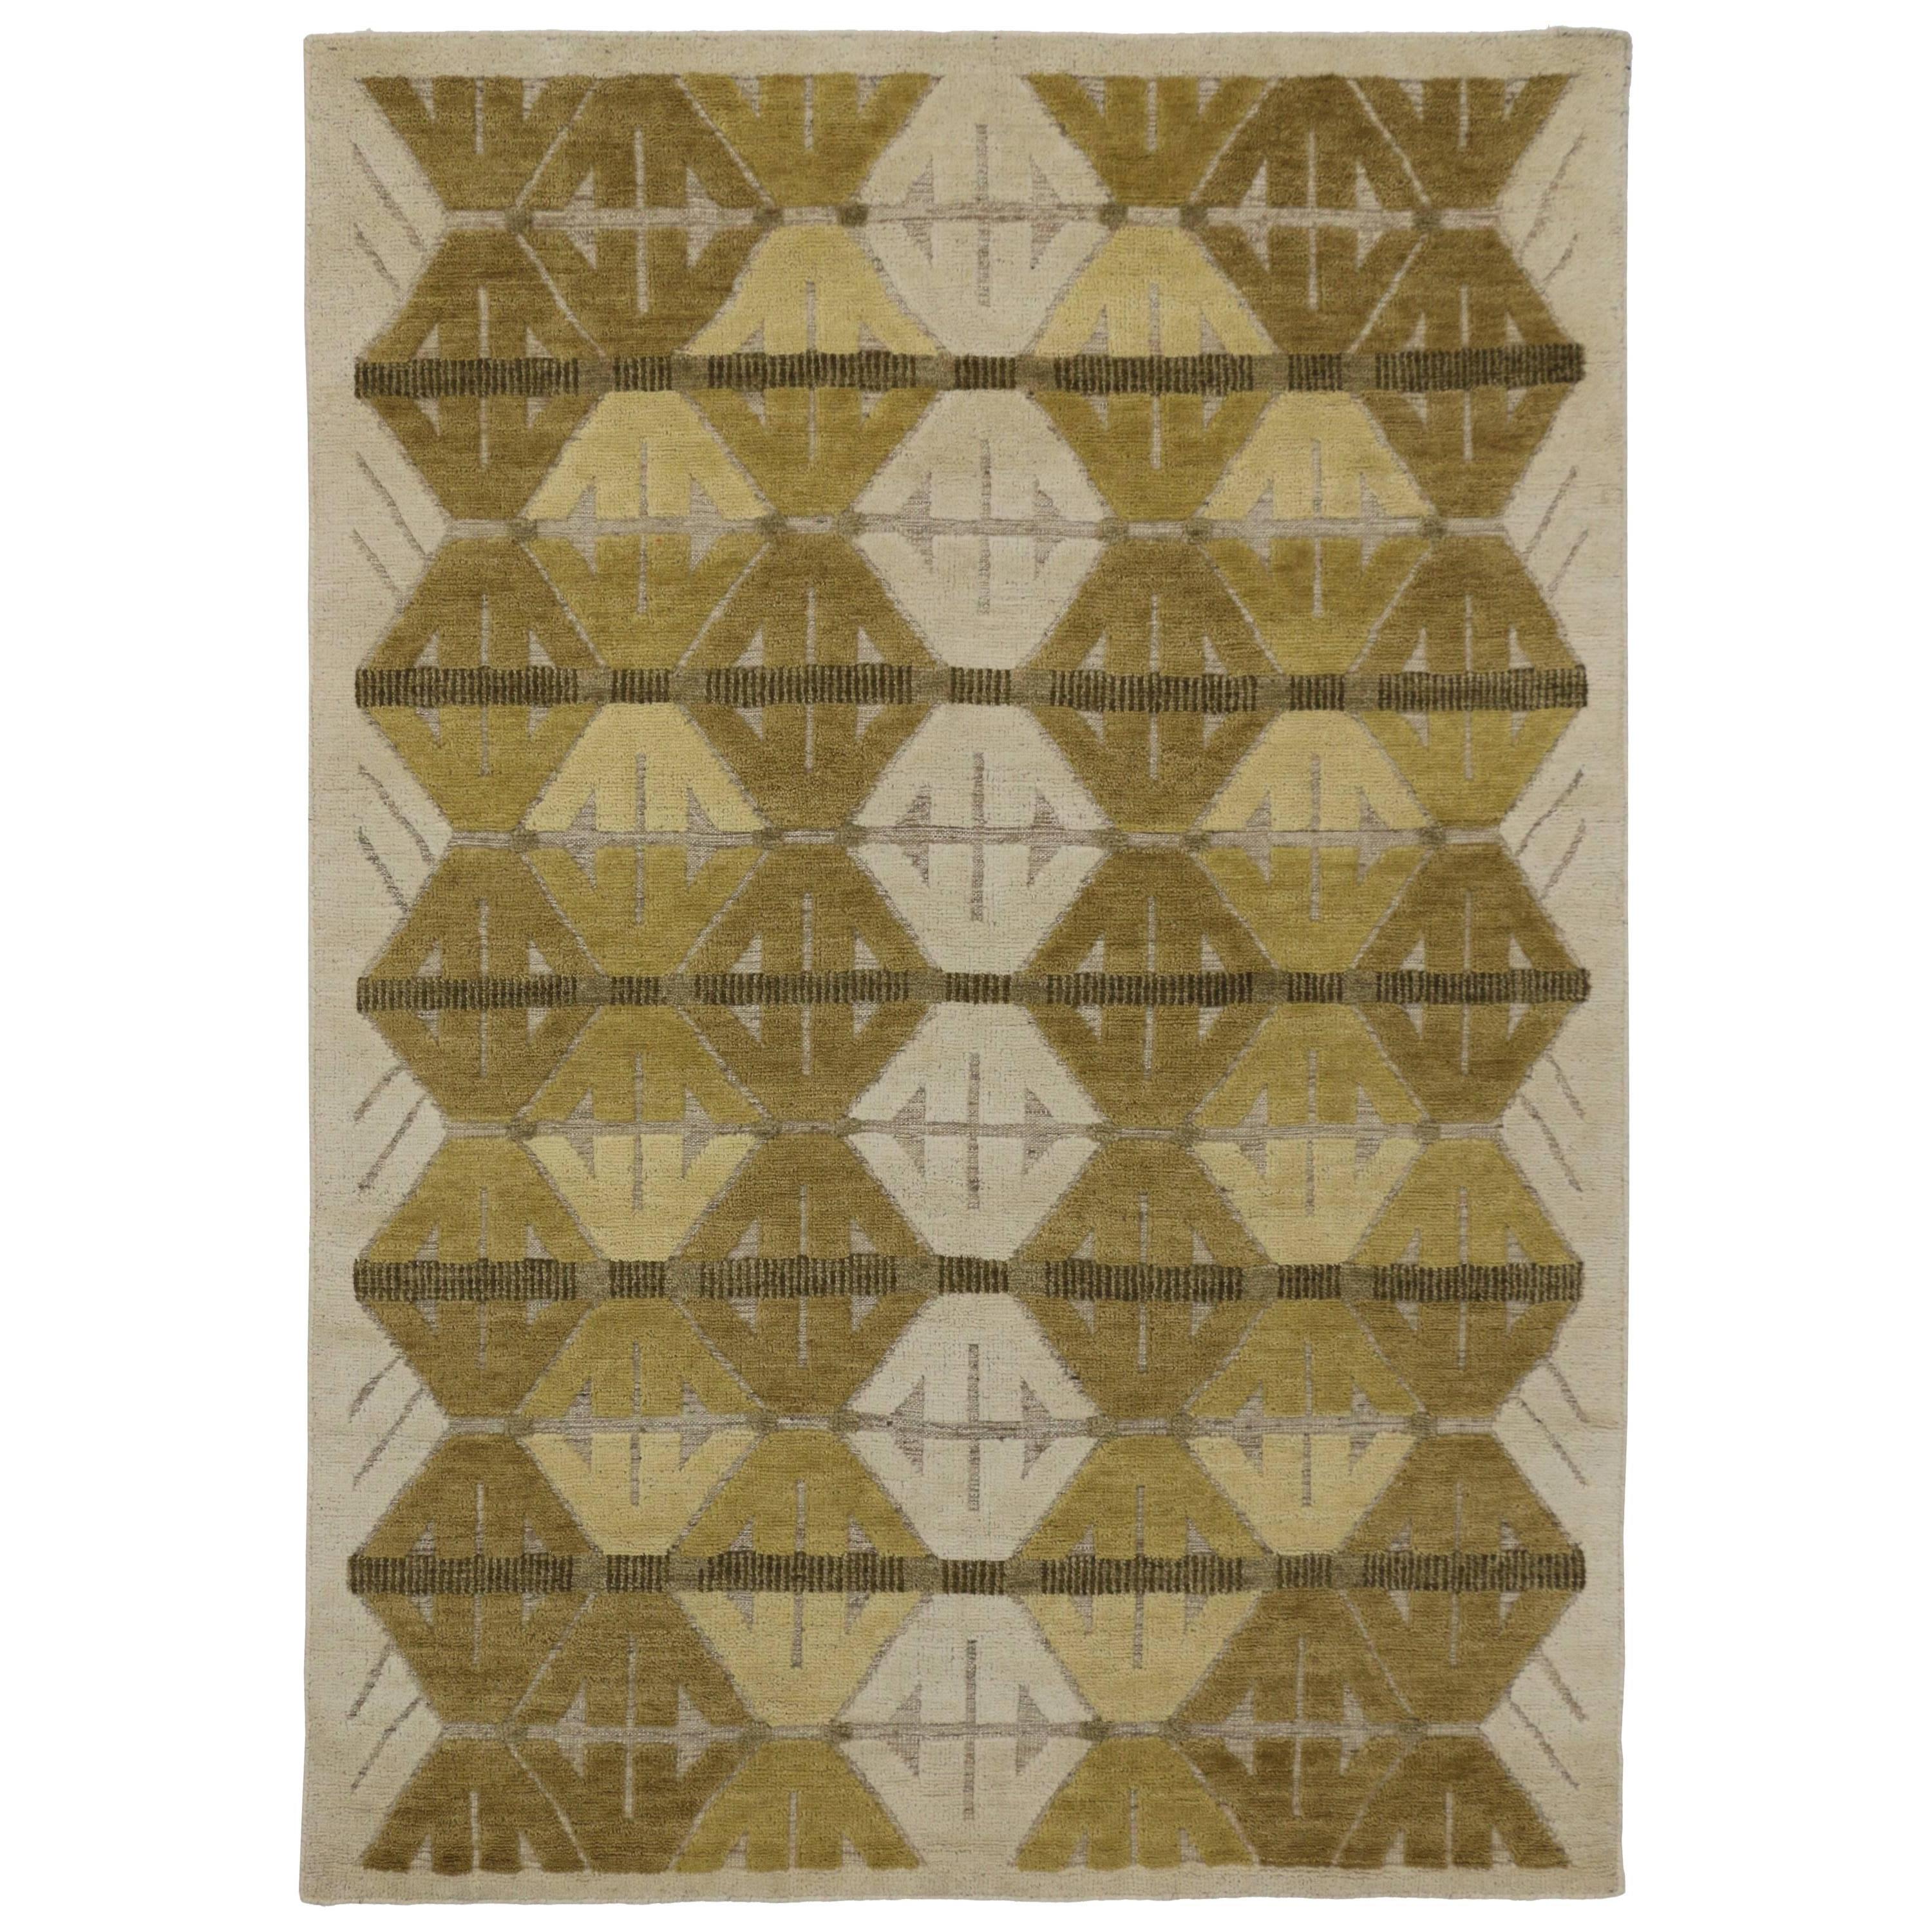 New High and Low Texture Rug with Contemporary Geometric Design and MCM Style